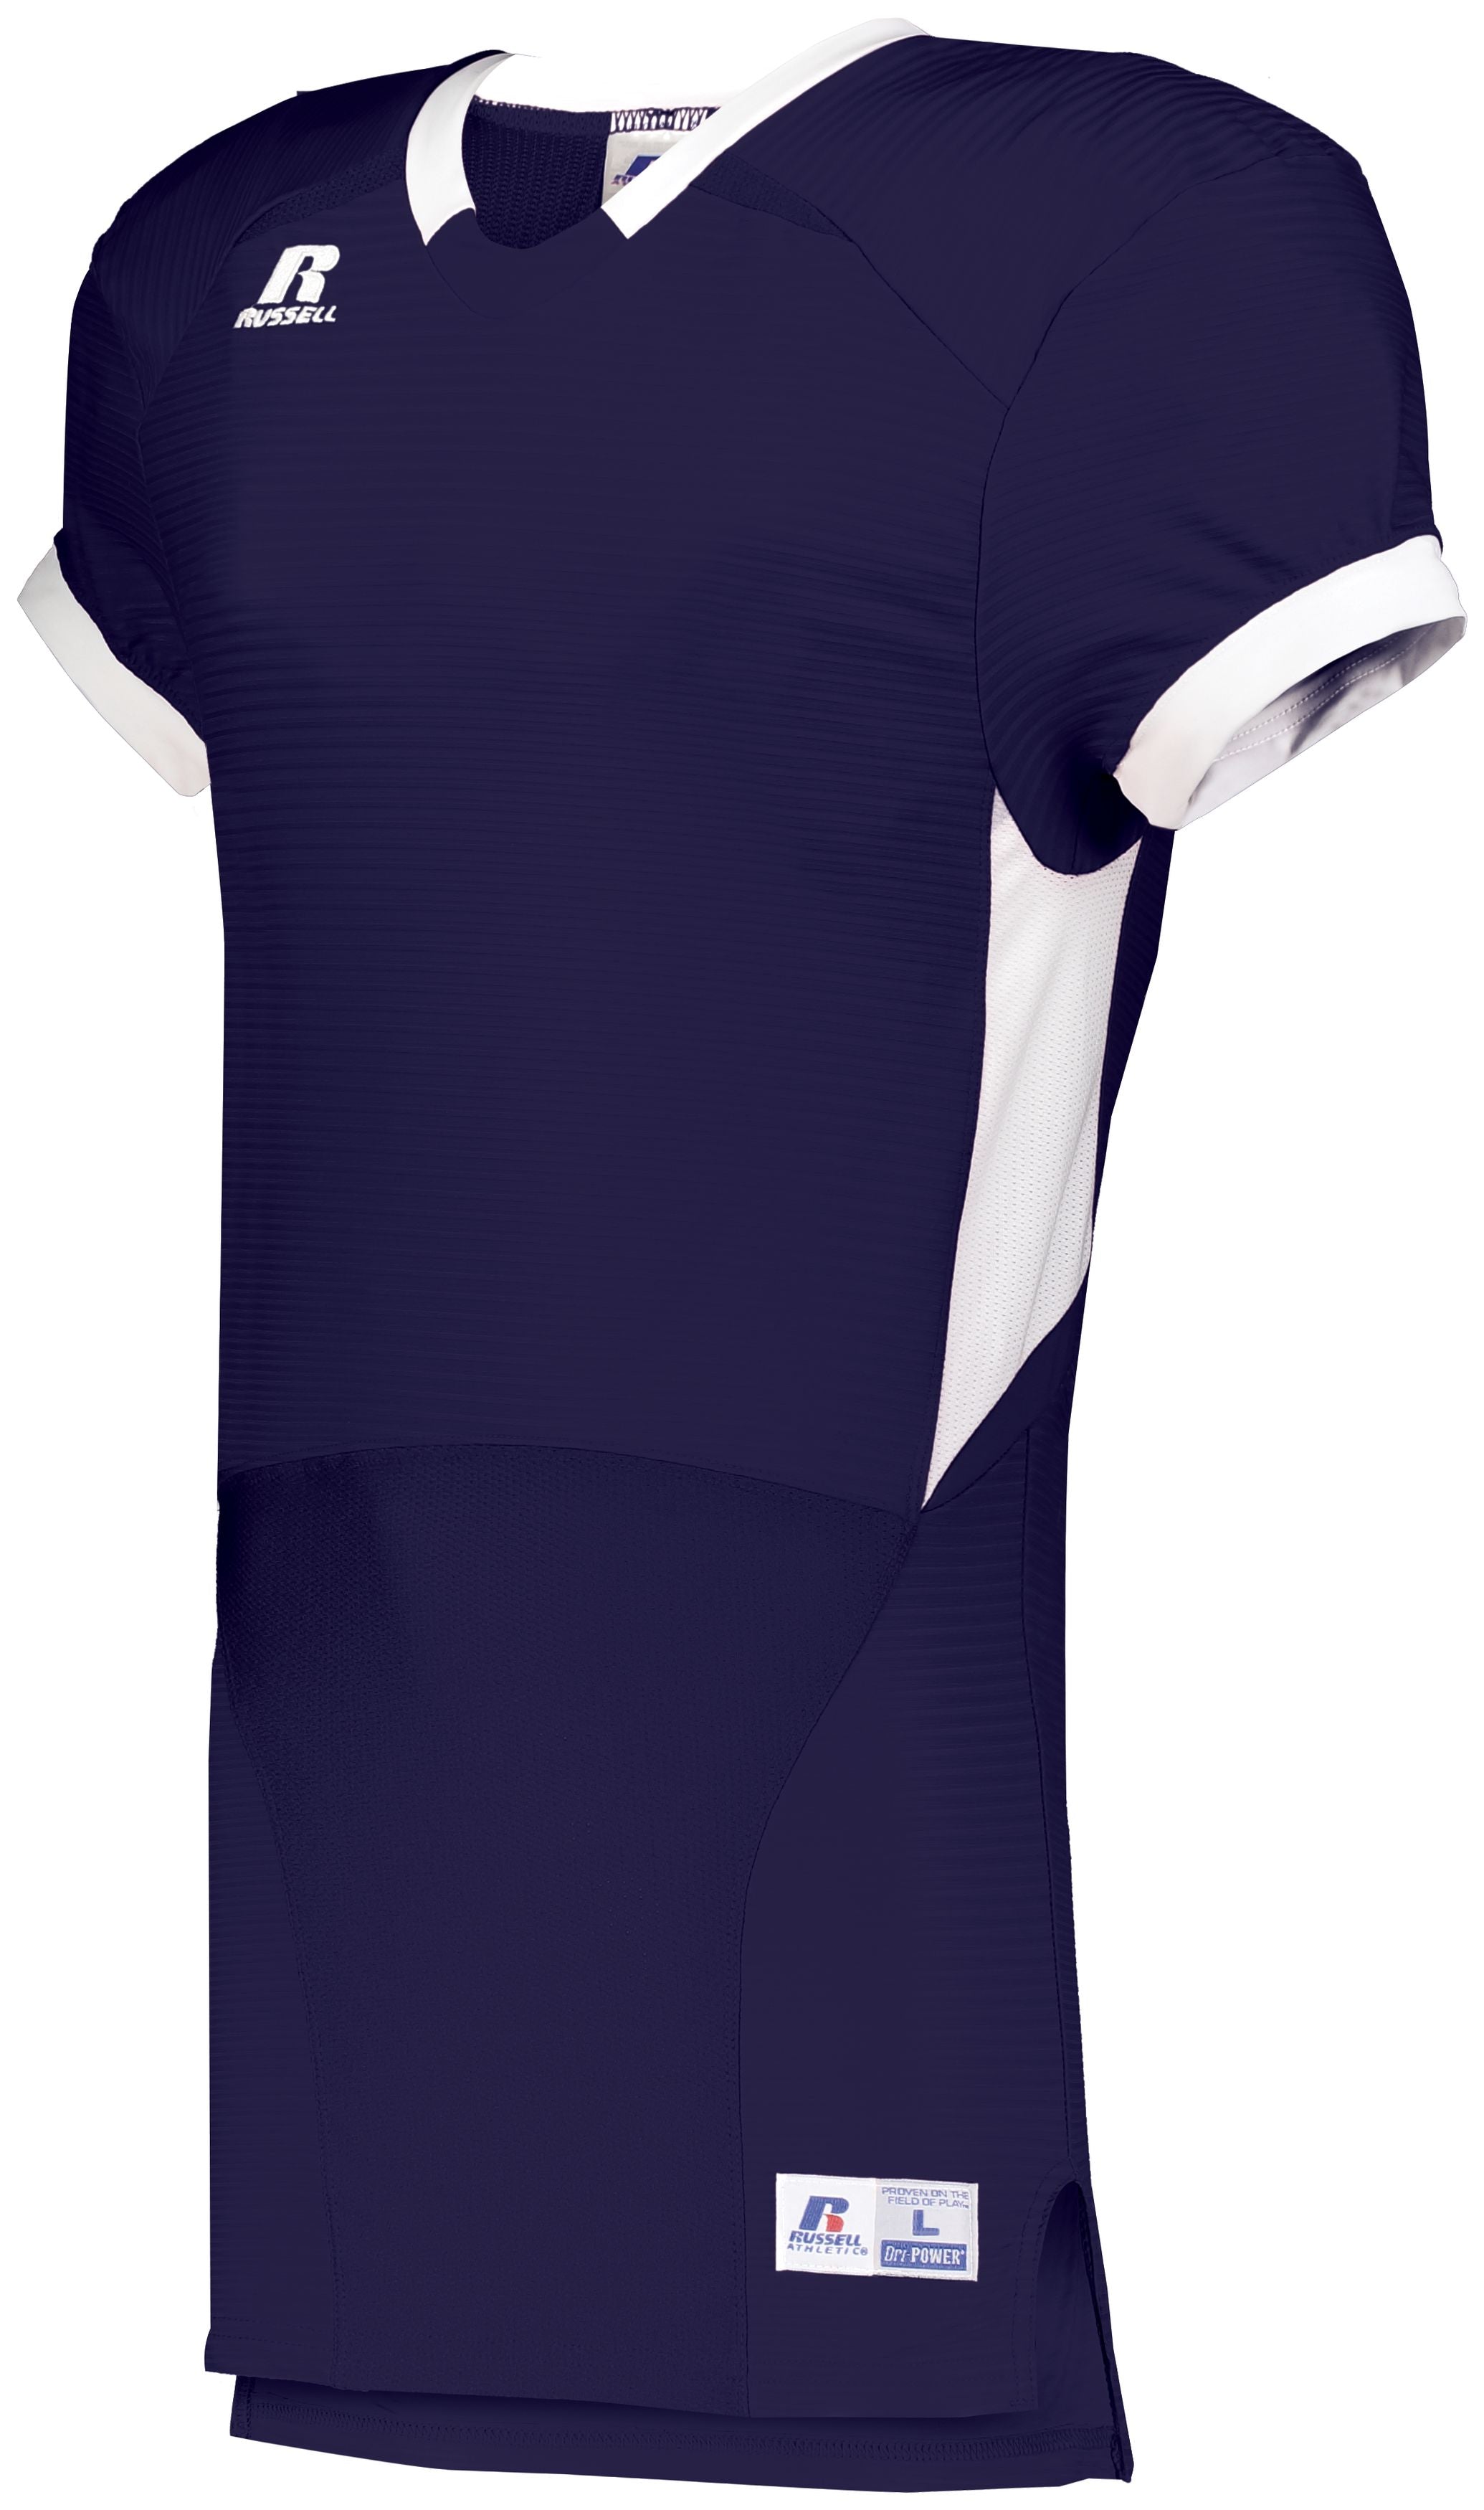 Russell Athletic Color Block Game Jersey in Purple/White  -Part of the Adult, Adult-Jersey, Football, Russell-Athletic-Products, Shirts, All-Sports, All-Sports-1 product lines at KanaleyCreations.com